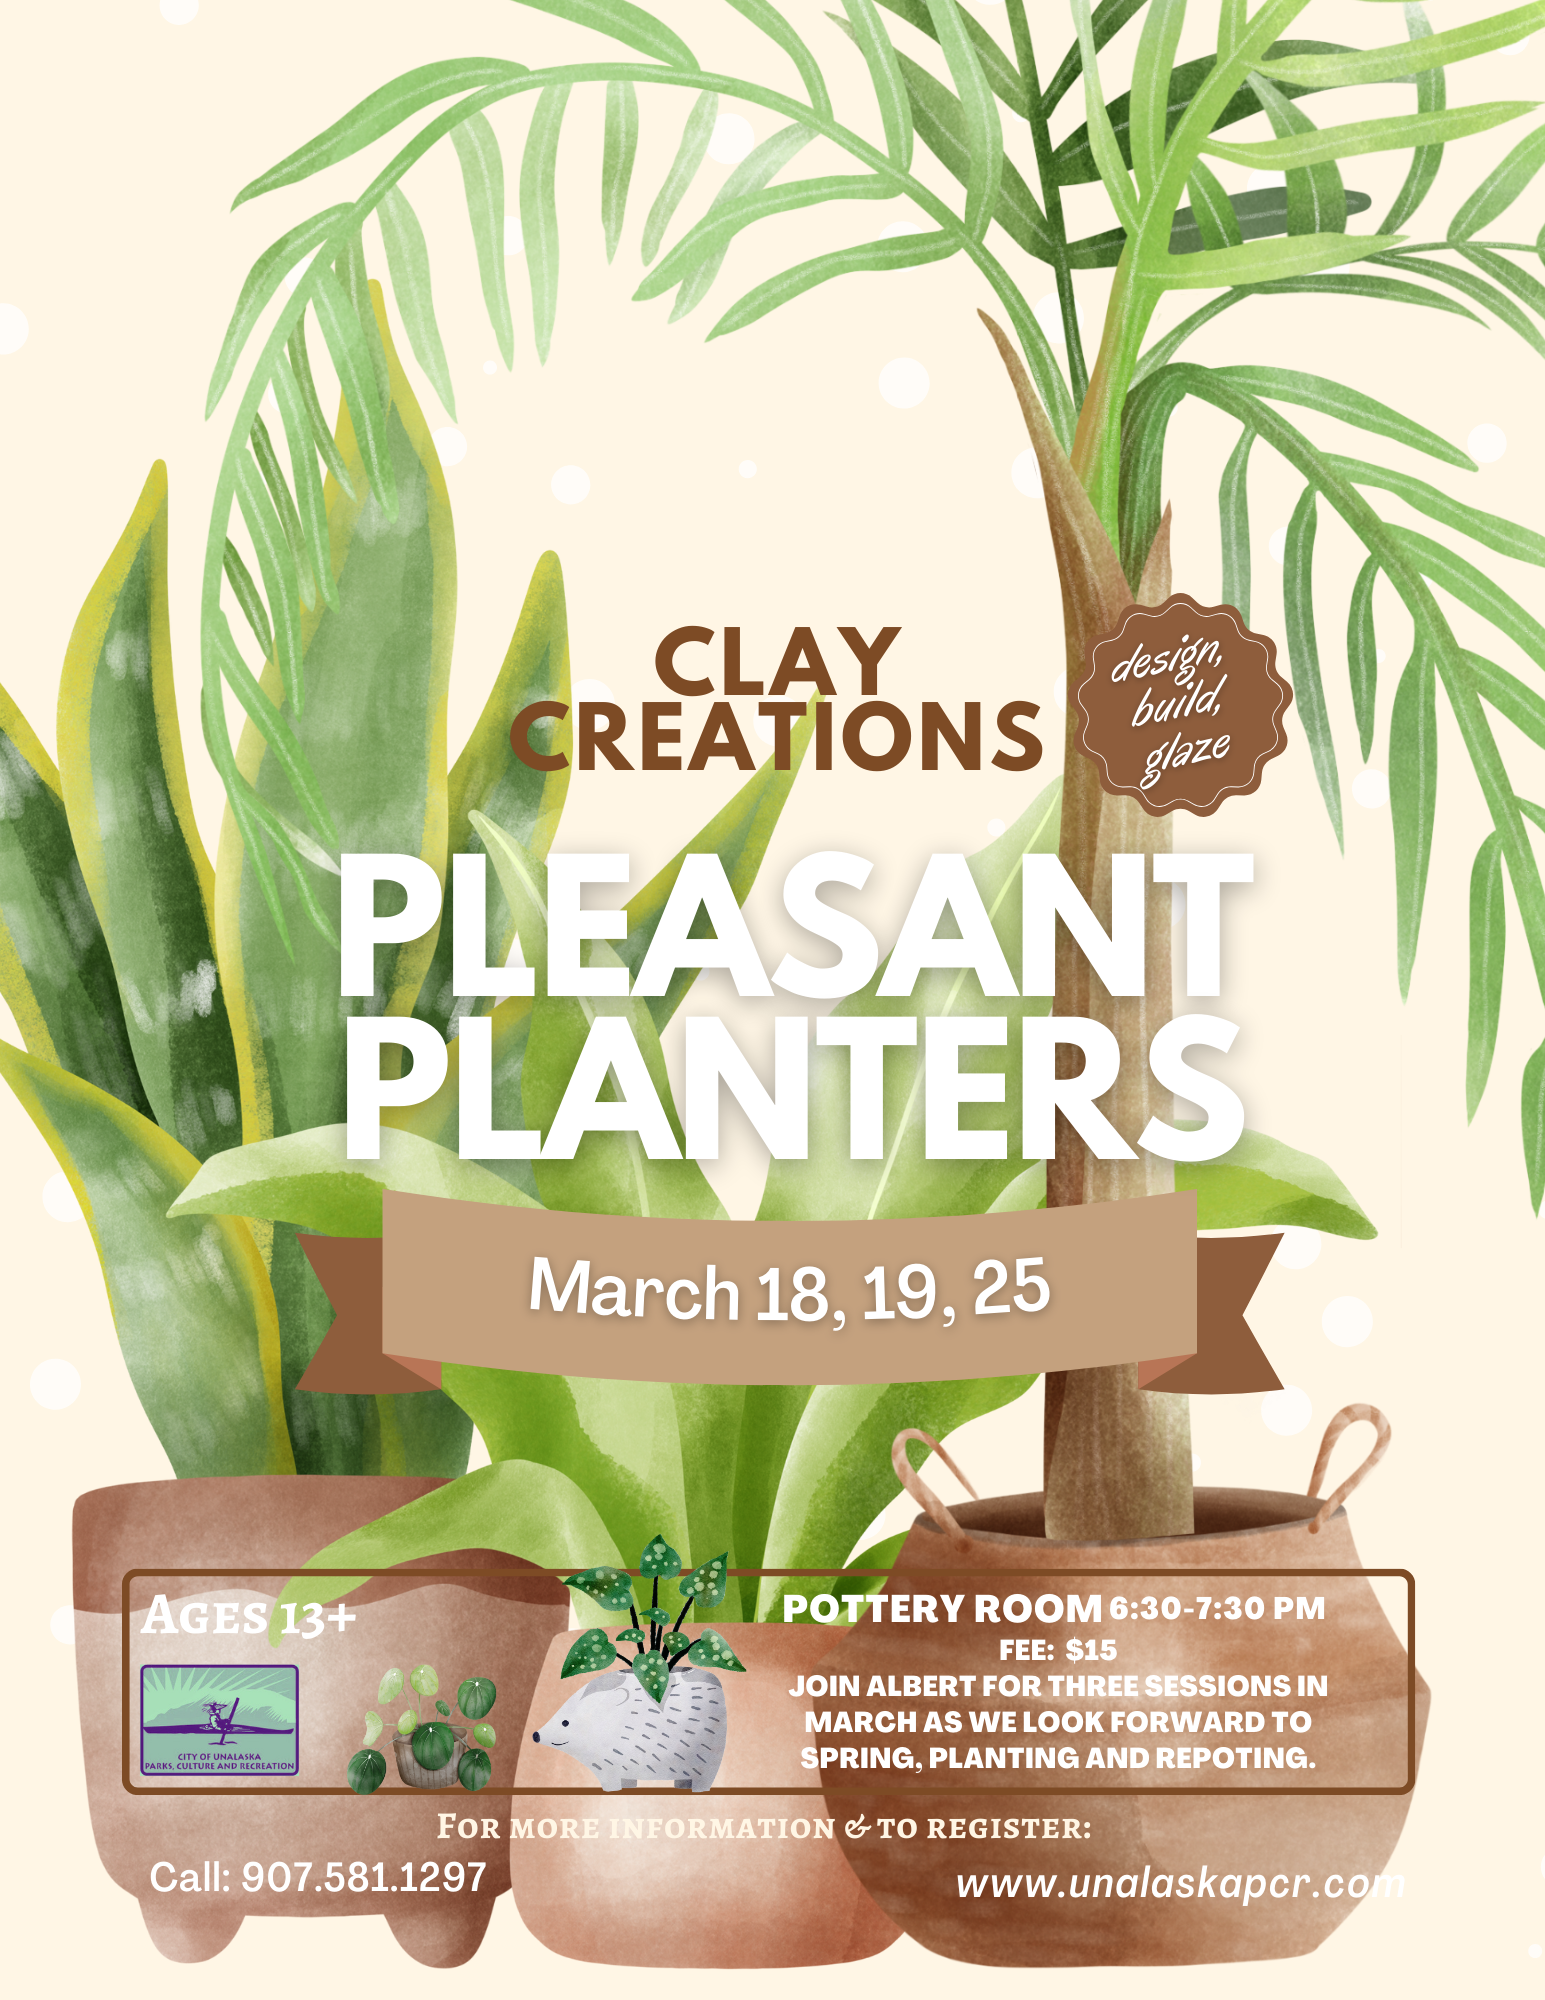 Clay creations pleasant planters